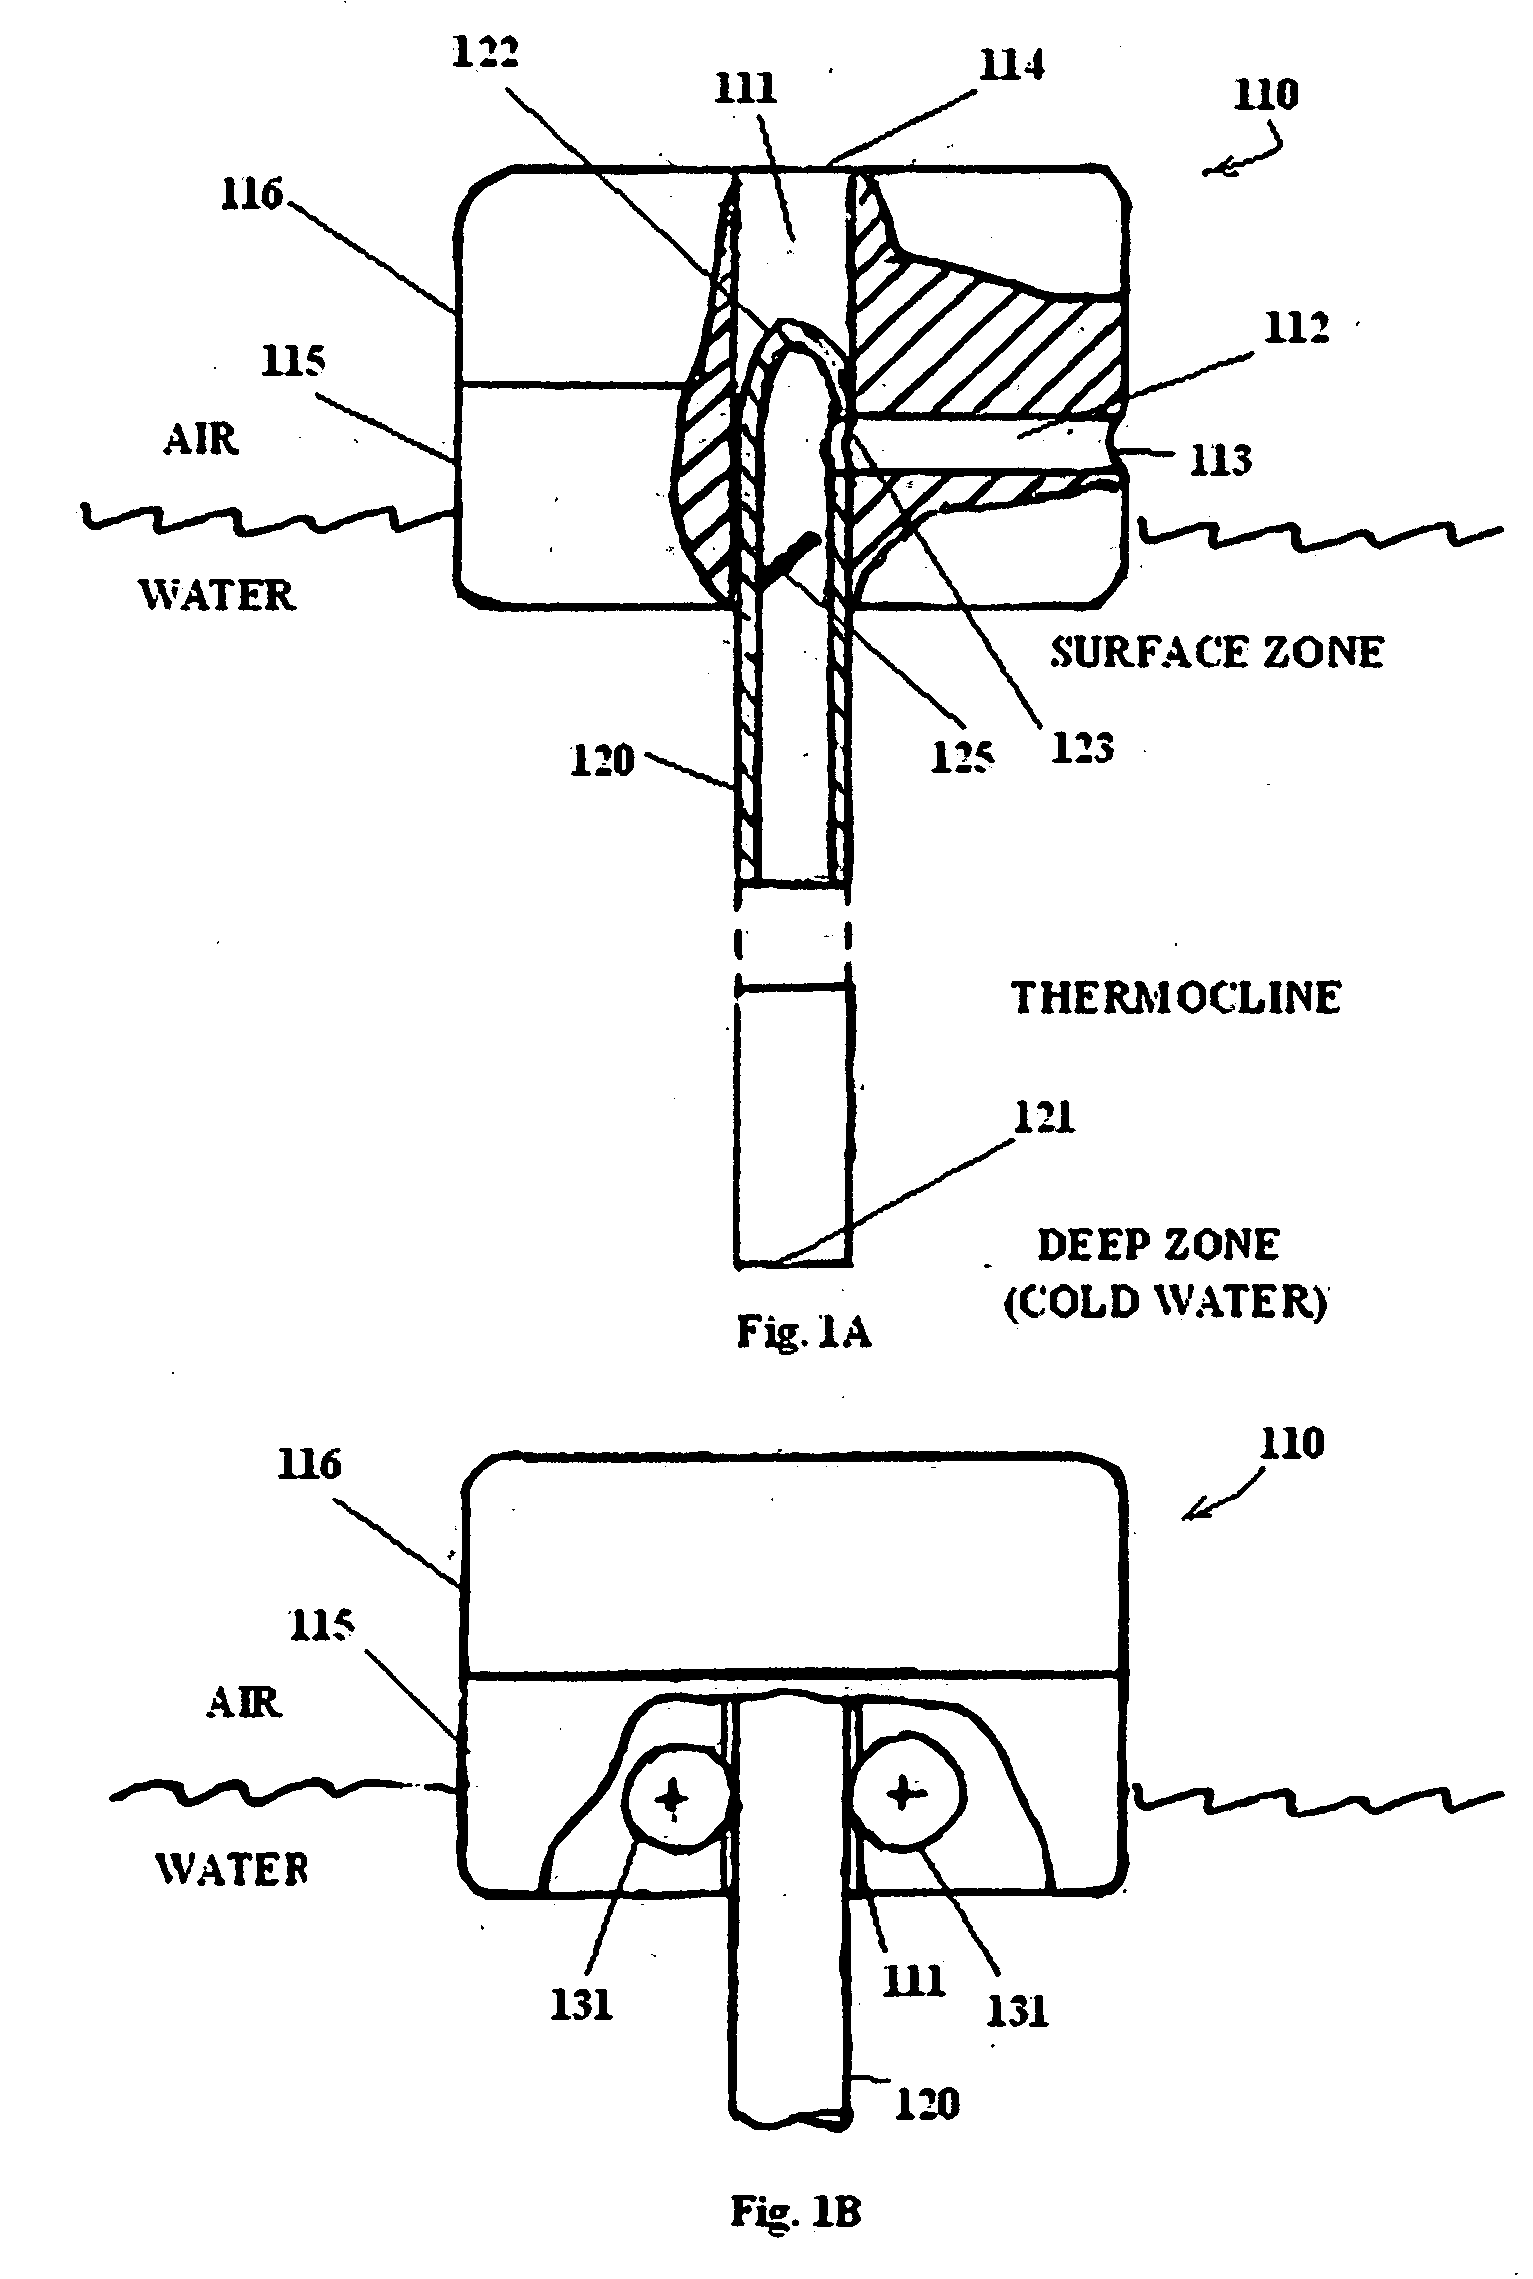 Relocatable water pump station for and method of dangerous natural phenomena (mainly hurricane) weakening